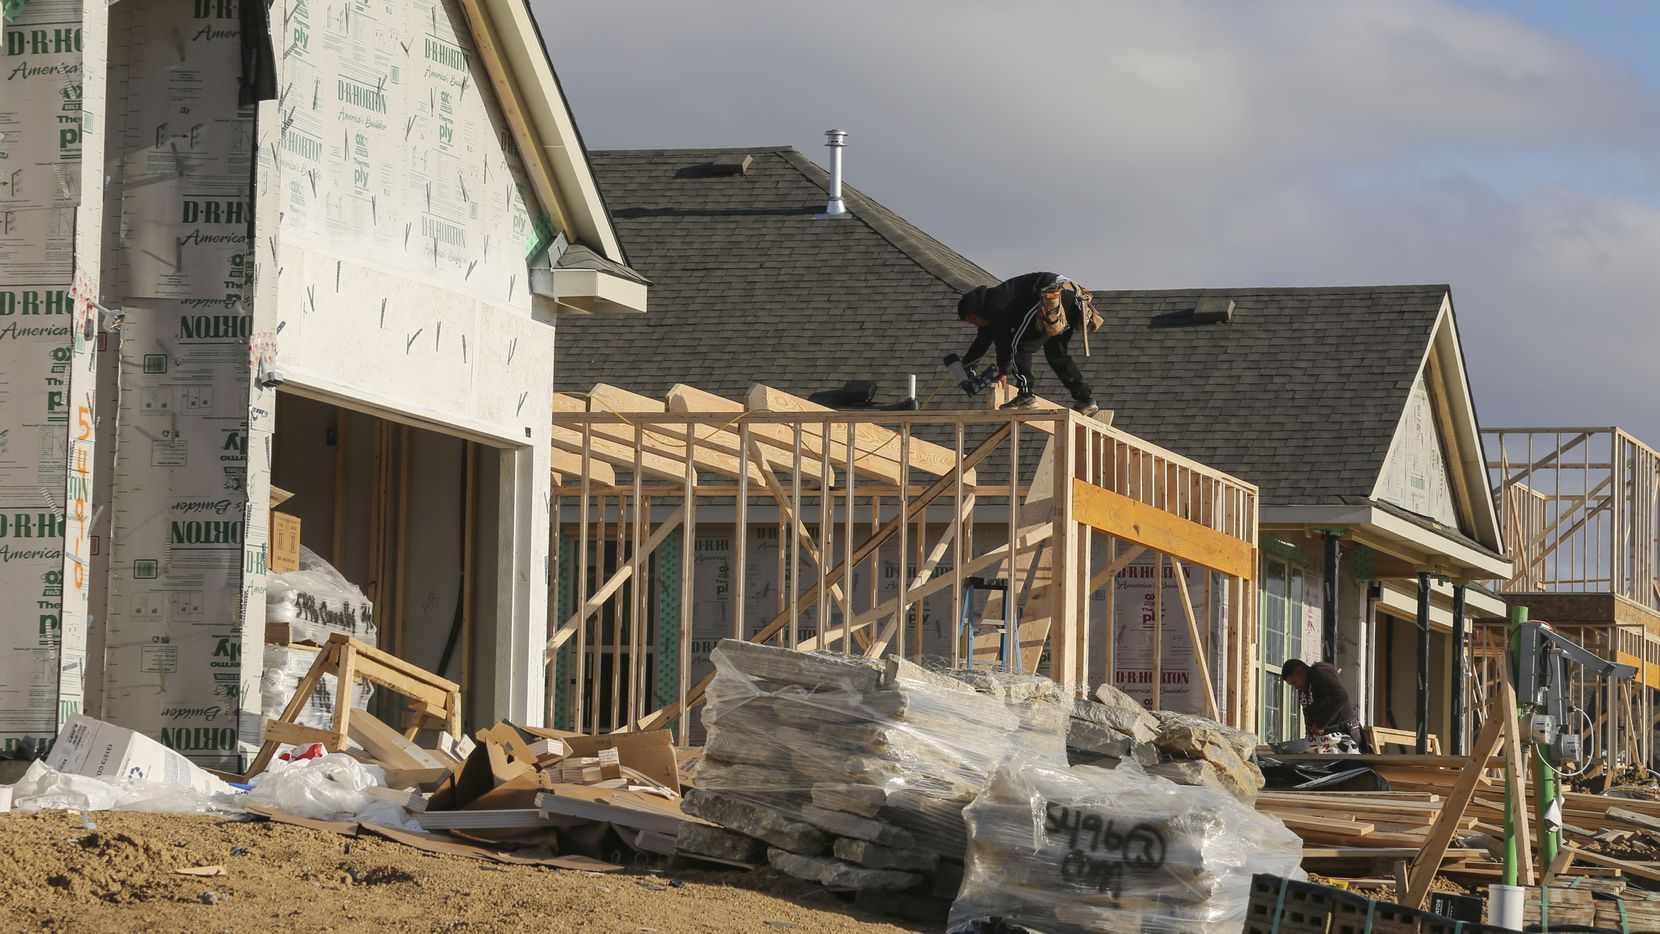 U.S. home starts are expected to rise 2 percent this year.